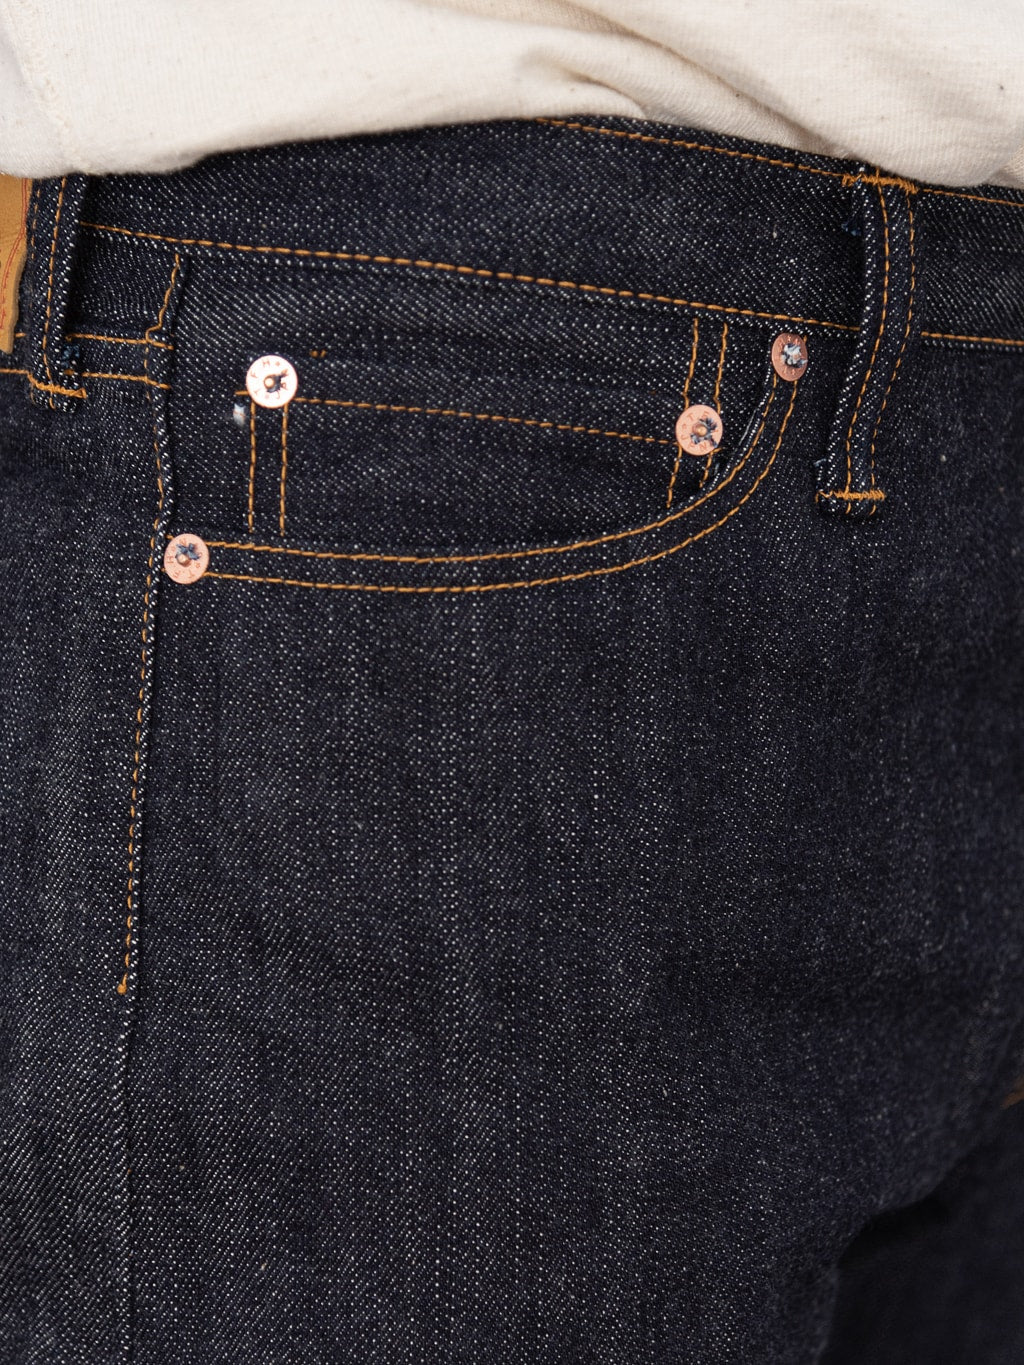 The Flat Head 3009 14.5oz straight tapered Jeans coin pocket closeup